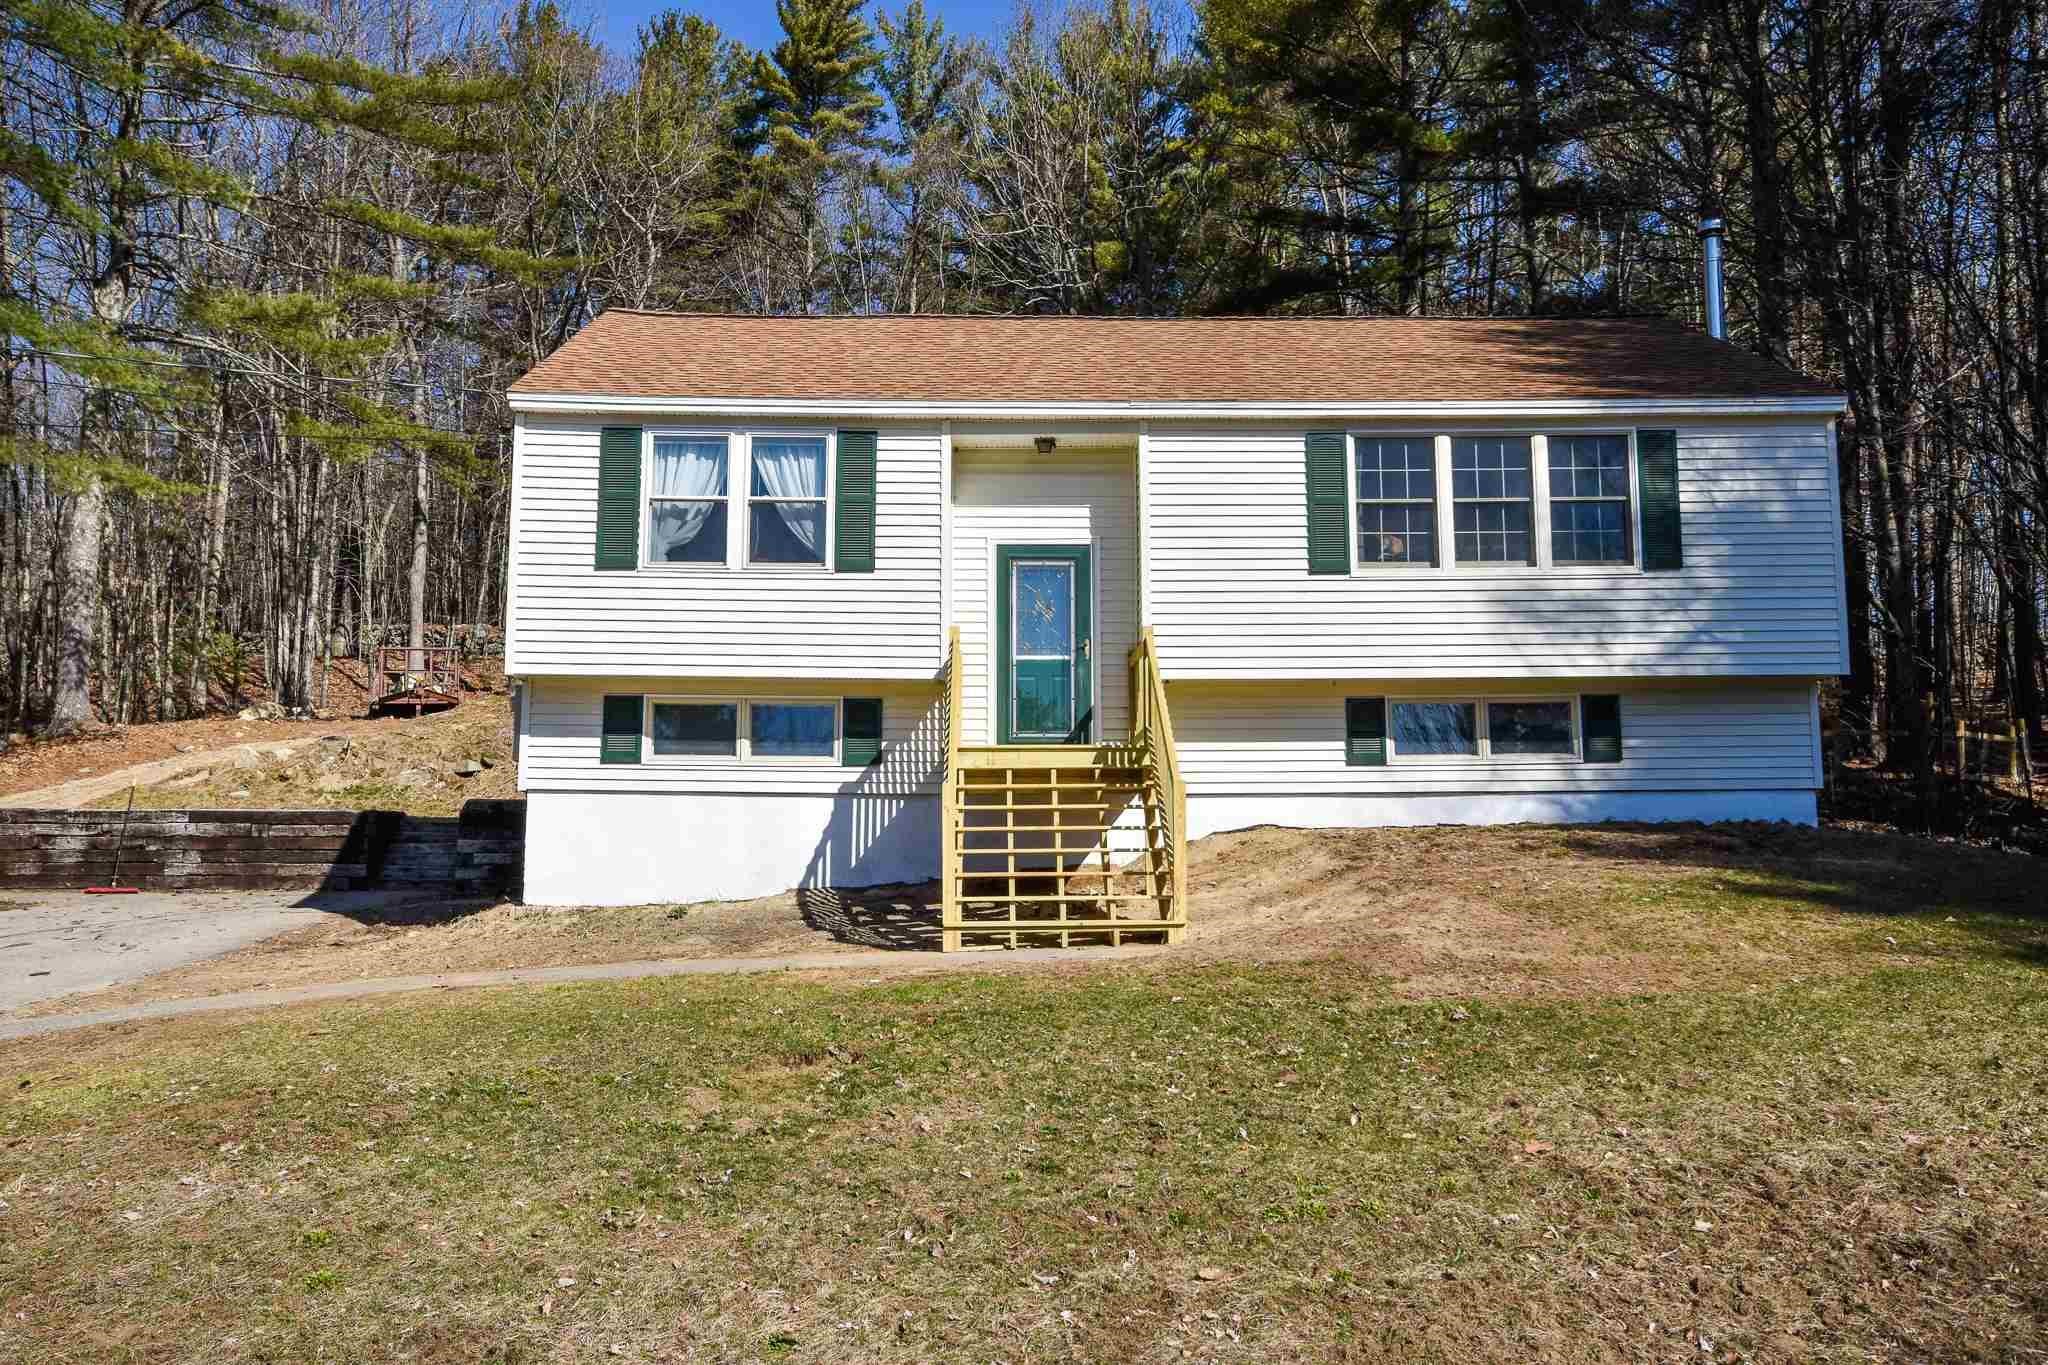 NEW DURHAM NH Homes for sale